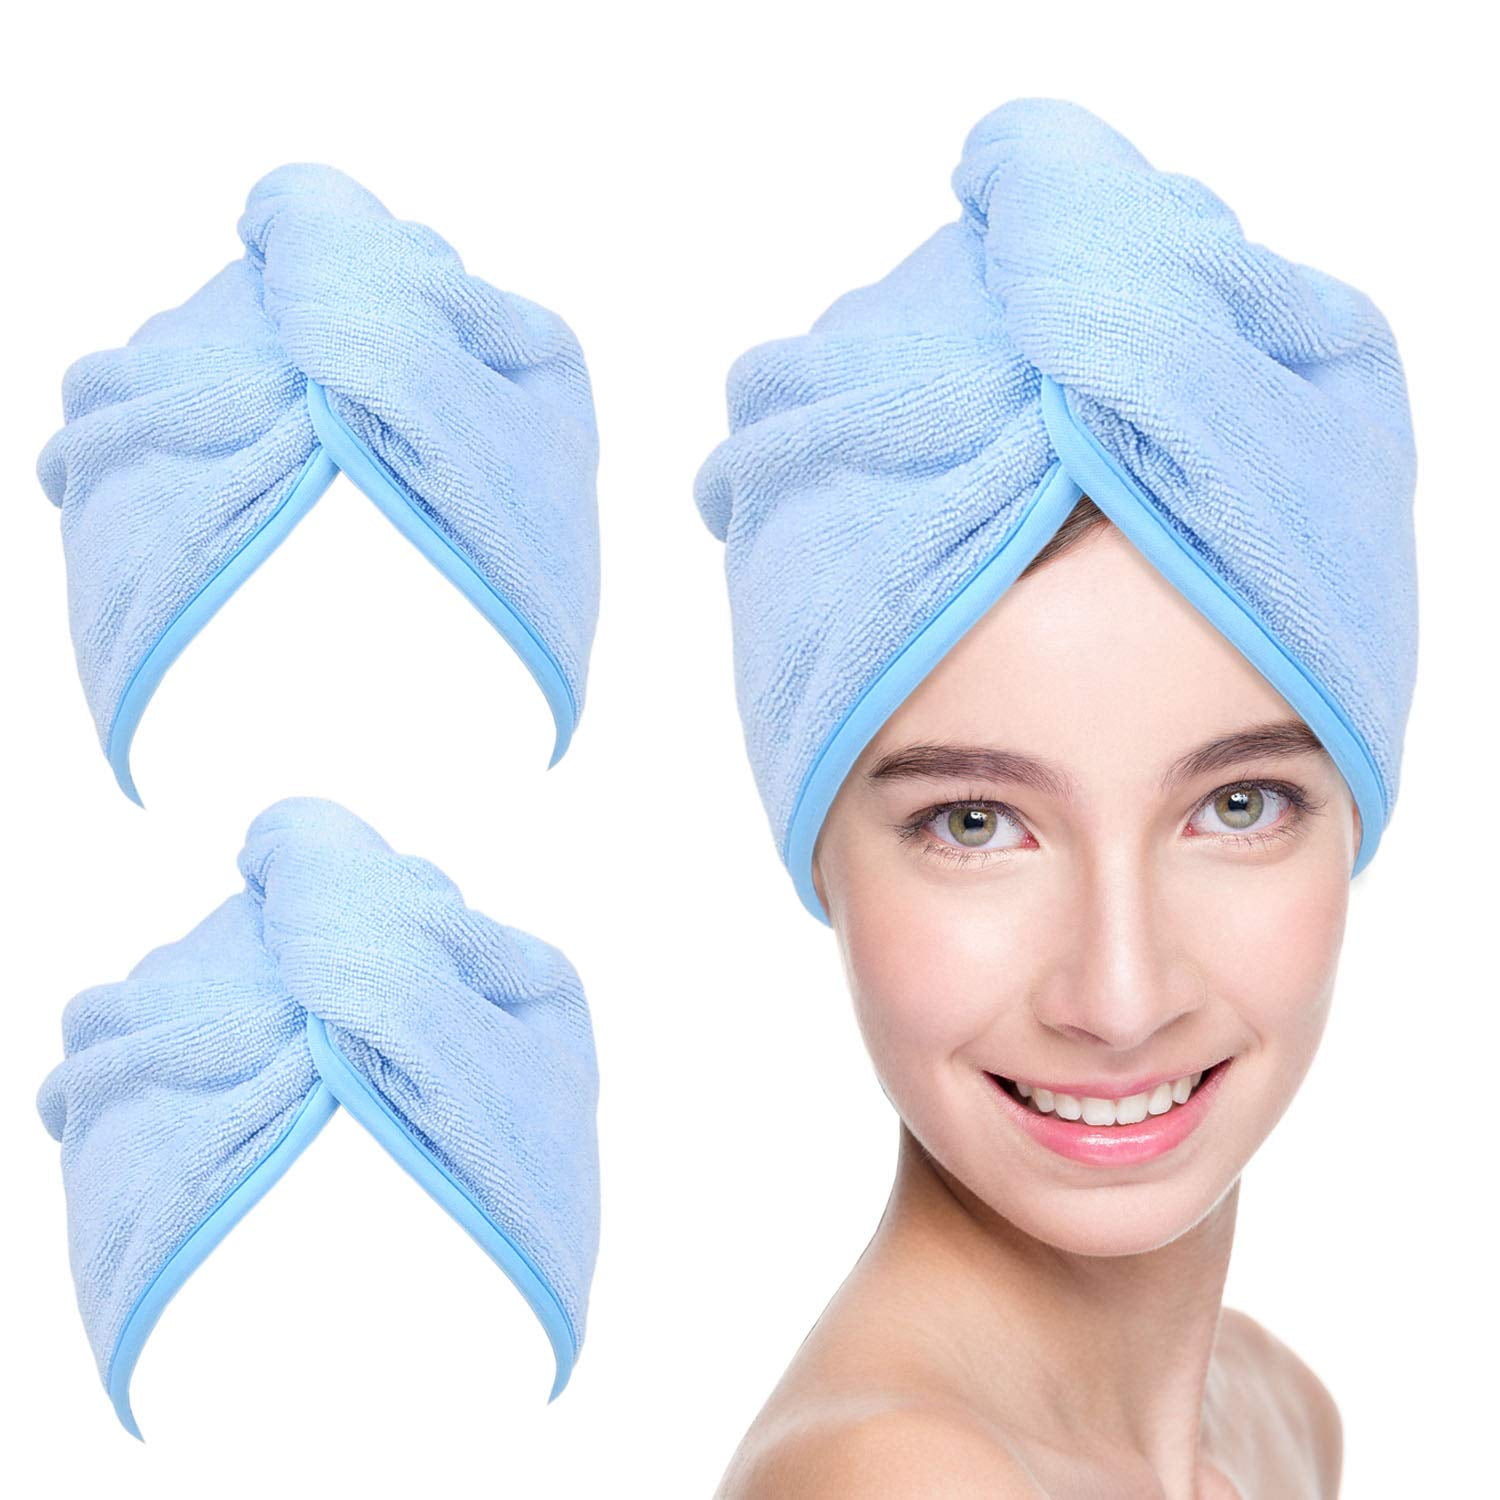 2 Packs Hair Towel Super Absorbent Microfibre Hair Drying Towels Soft Thickened Coral Fleece Skin-friendly Hair Turban No Lint No Fading Dry Hair Cap